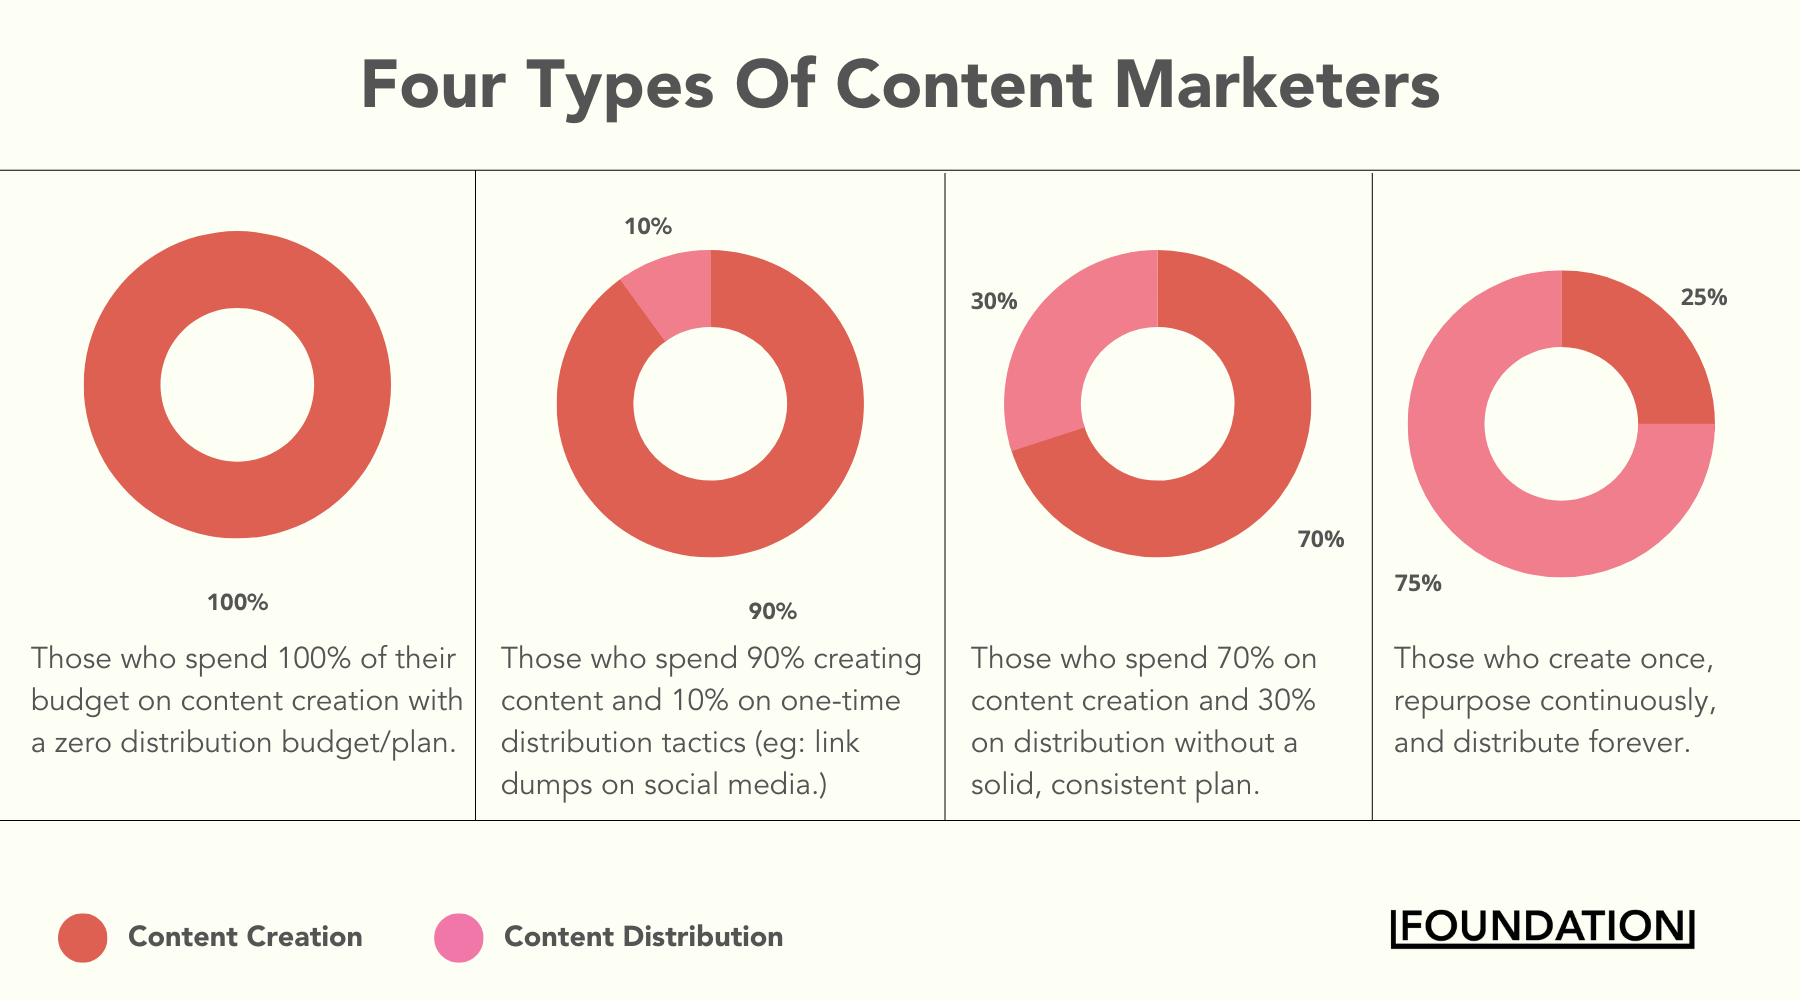 Four types of content marketers